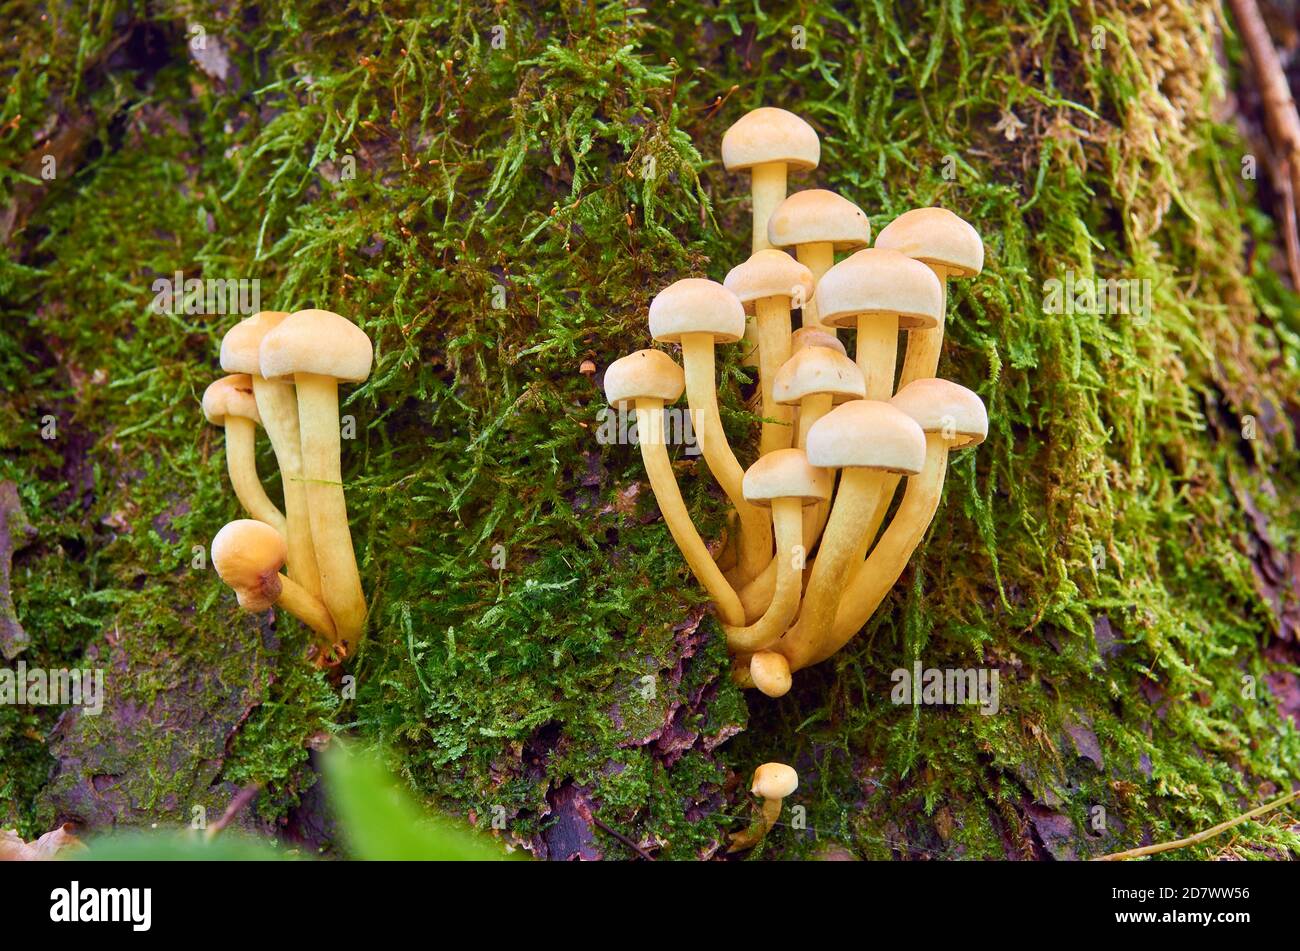 Yellow mushrooms with hats grow on a stump covered with moss Stock Photo